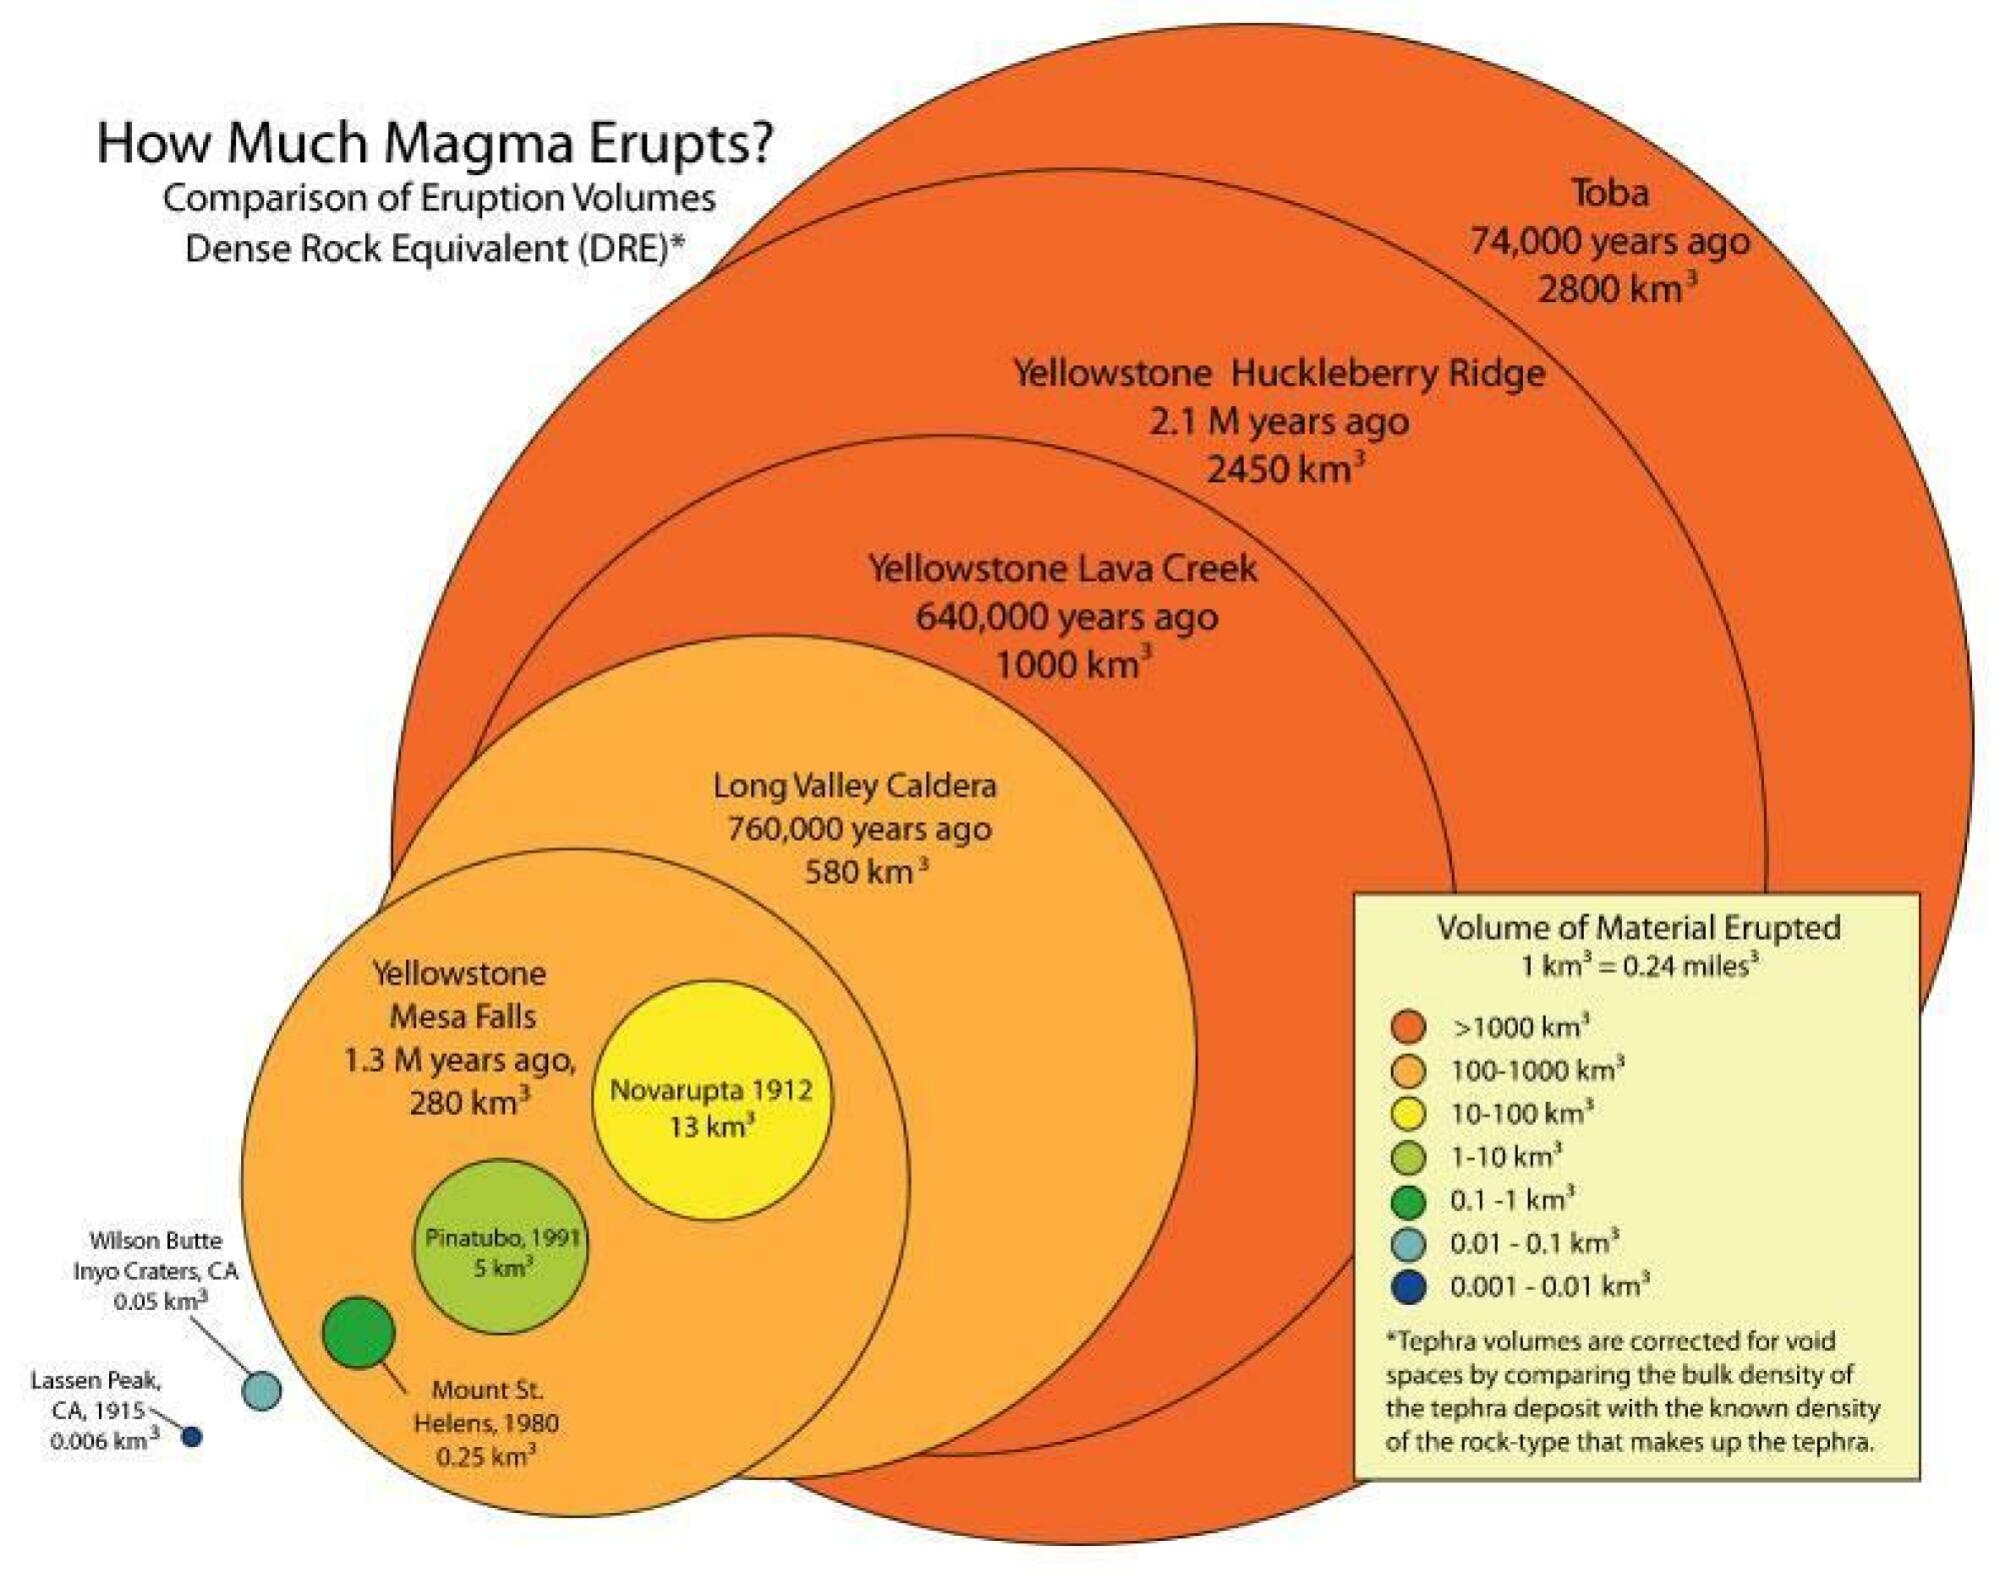 A visualization showing the scale of different eruptions. The largest orange circle shows the Toba super-eruption from 74,000 years ago.